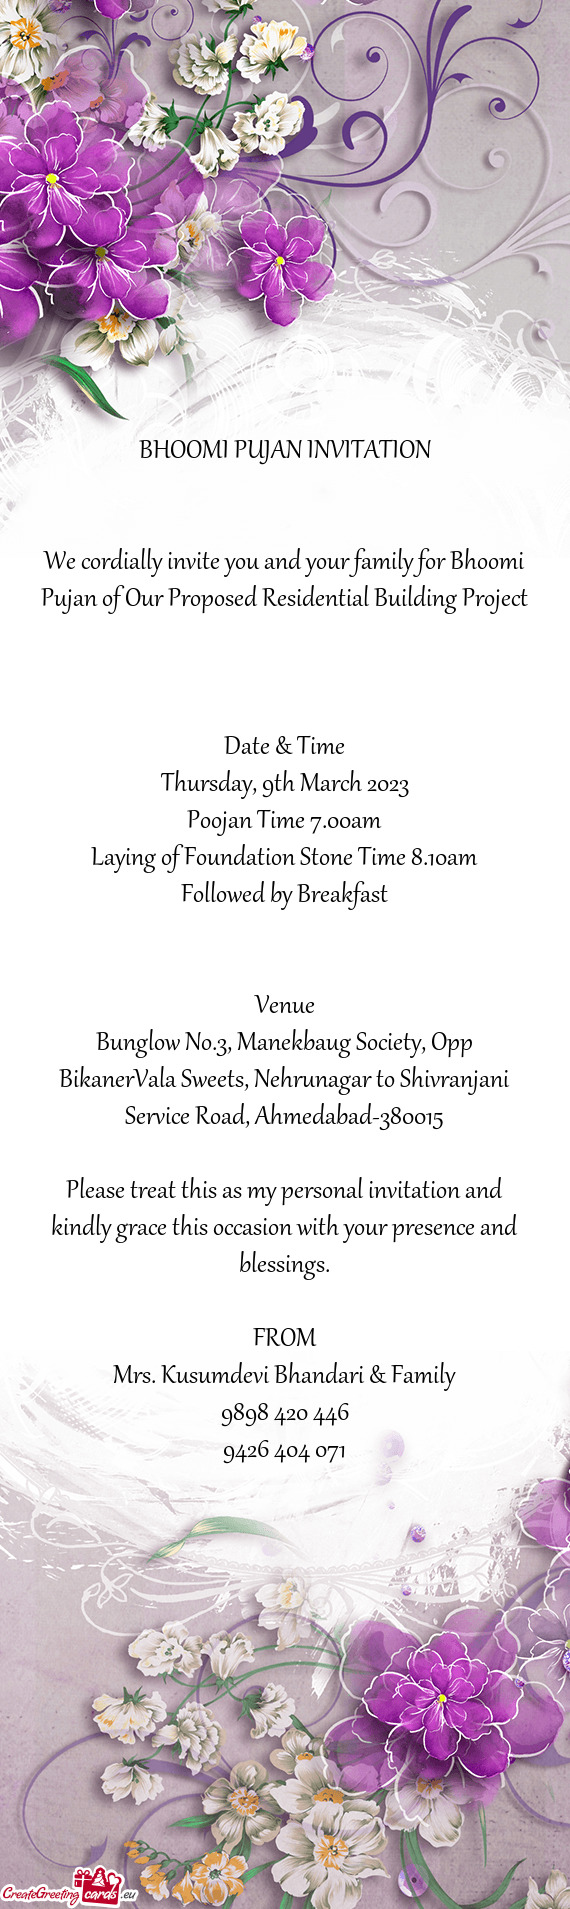 Laying of Foundation Stone Time 8.10am